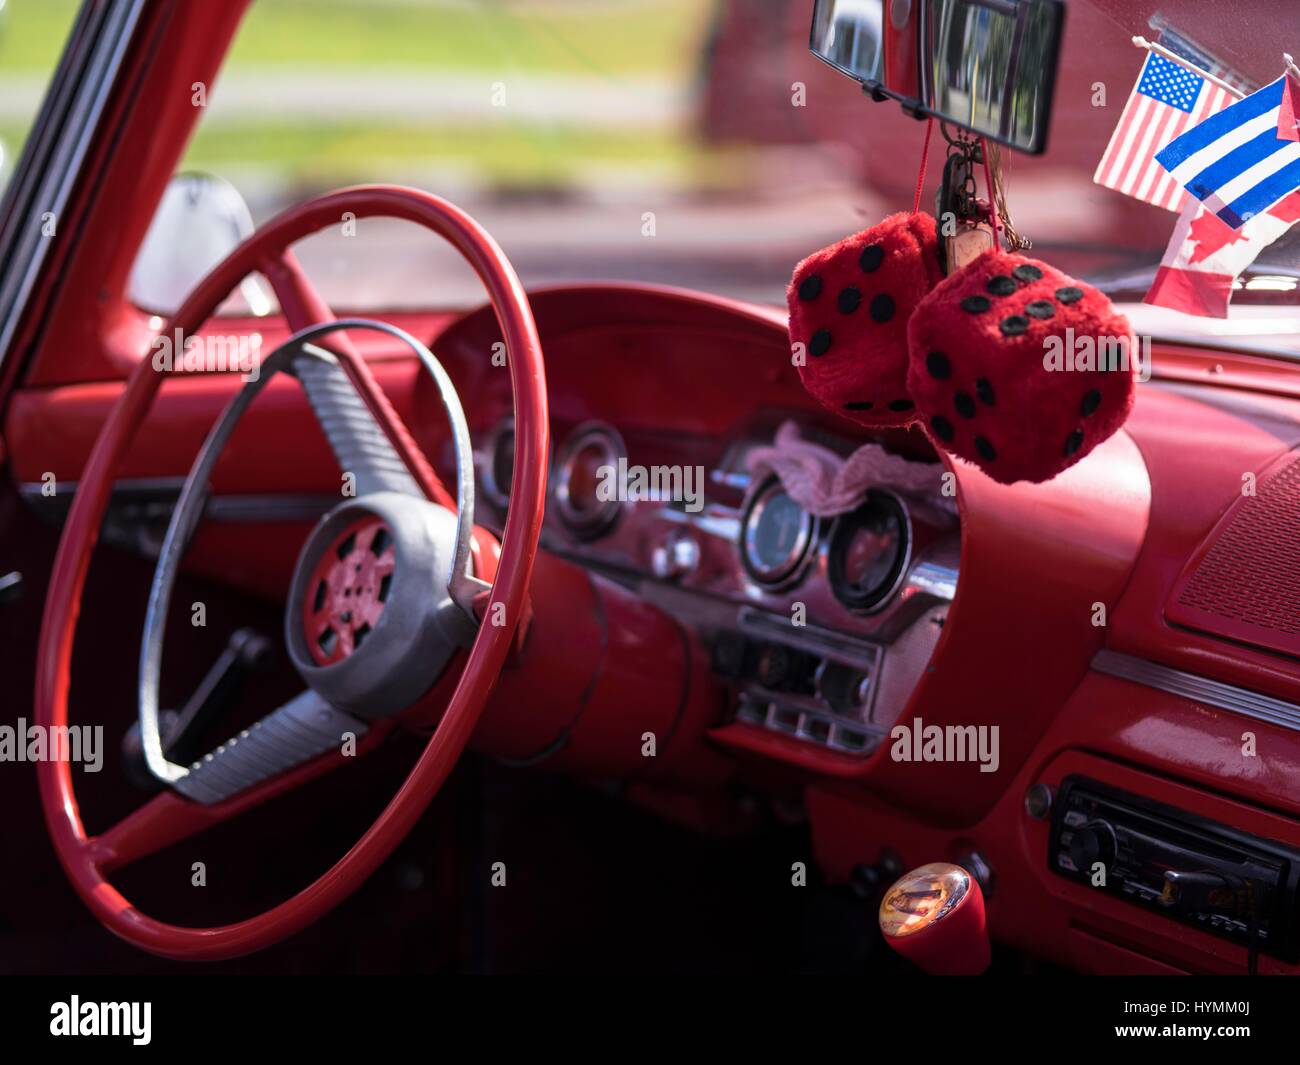 Old fashioned classic 1950s Ford Edsel American car in red colour with image of Che Guevara in Havana, Cuba Stock Photo